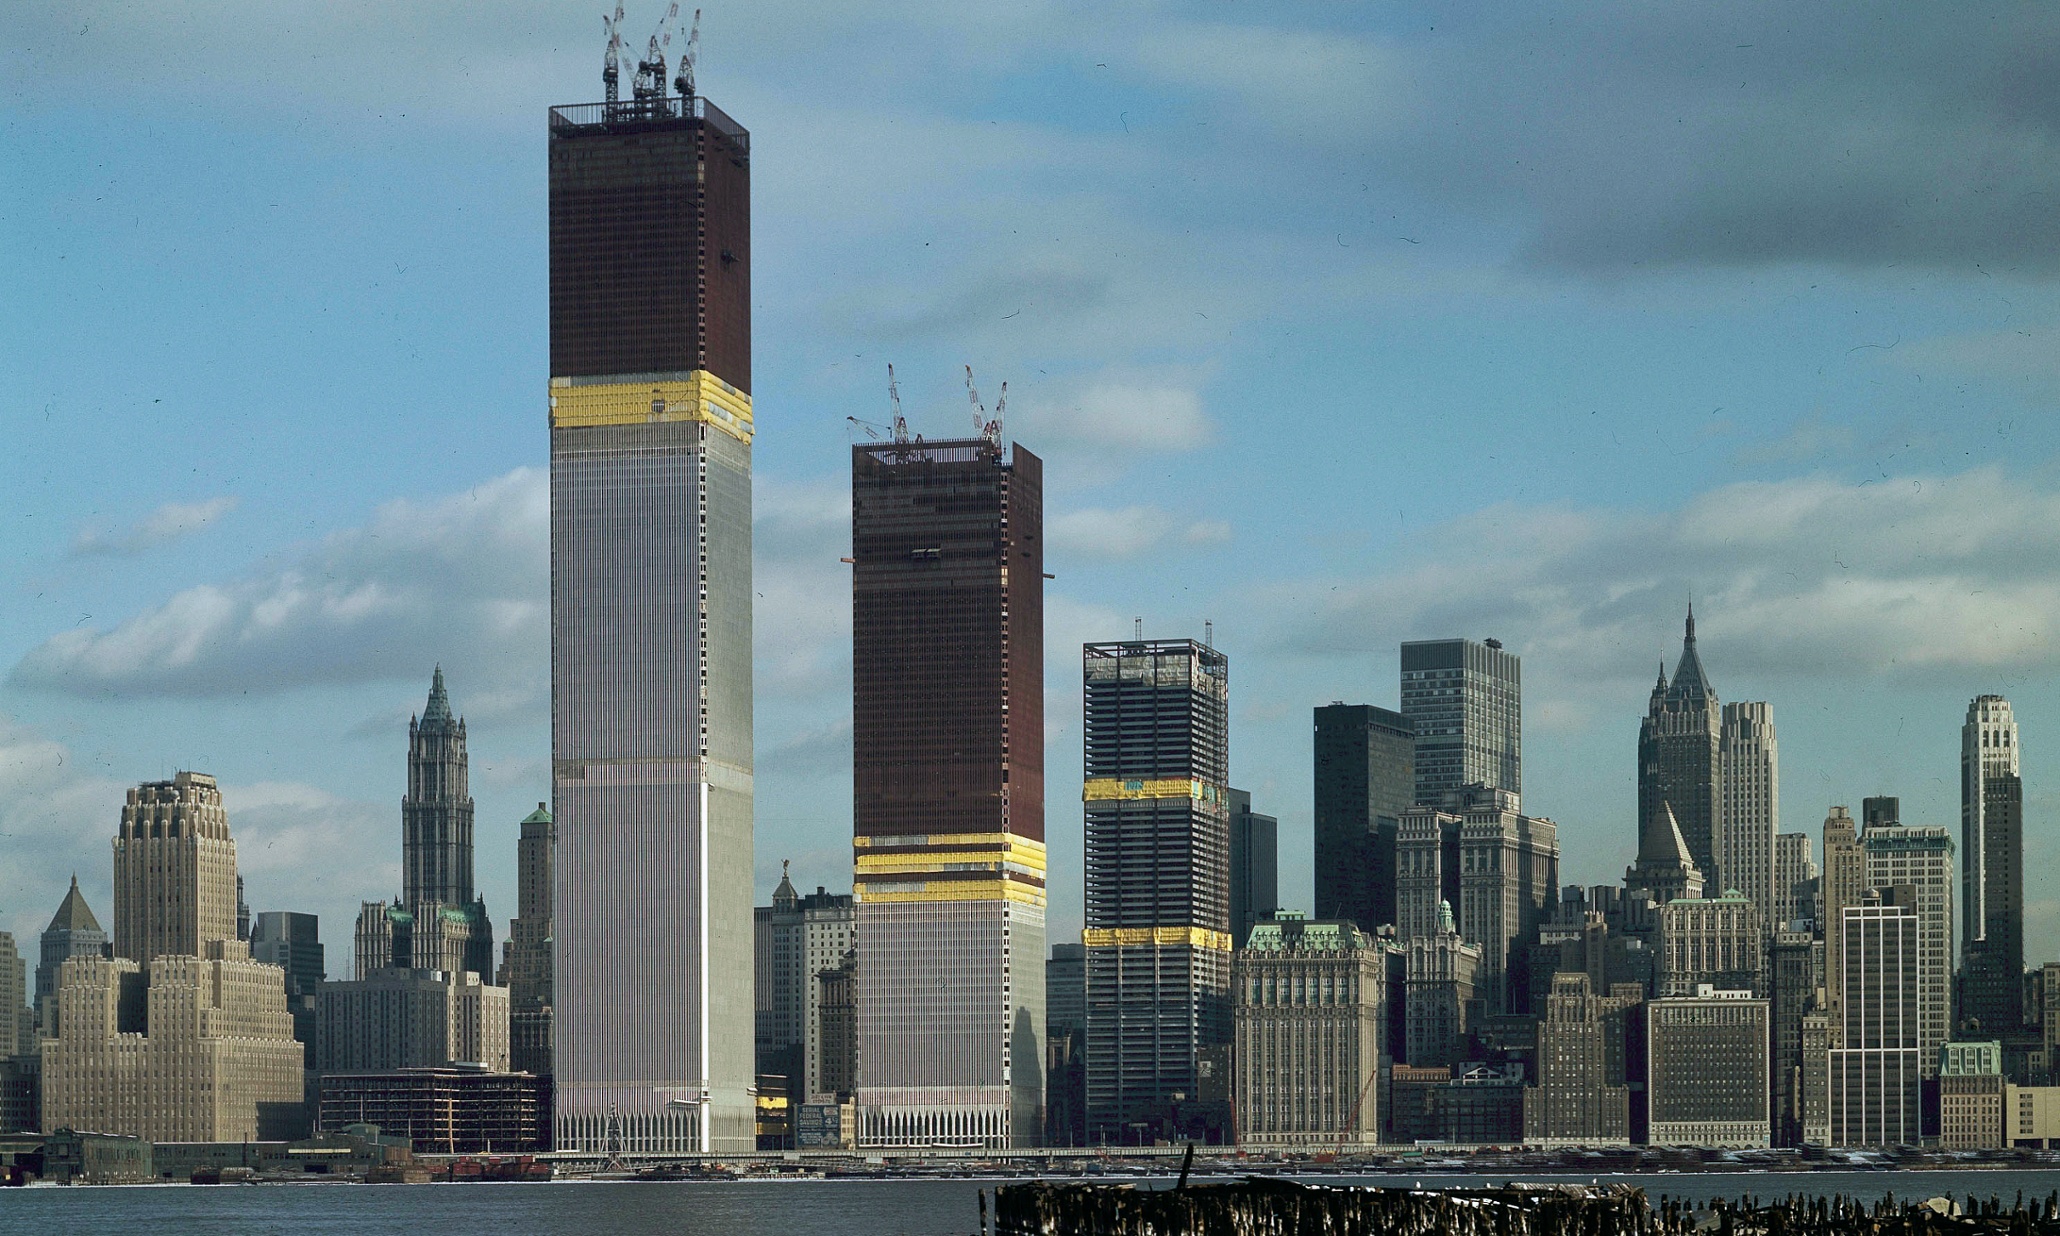 New York's twin towers – the 'filing cabinets' that became icons of